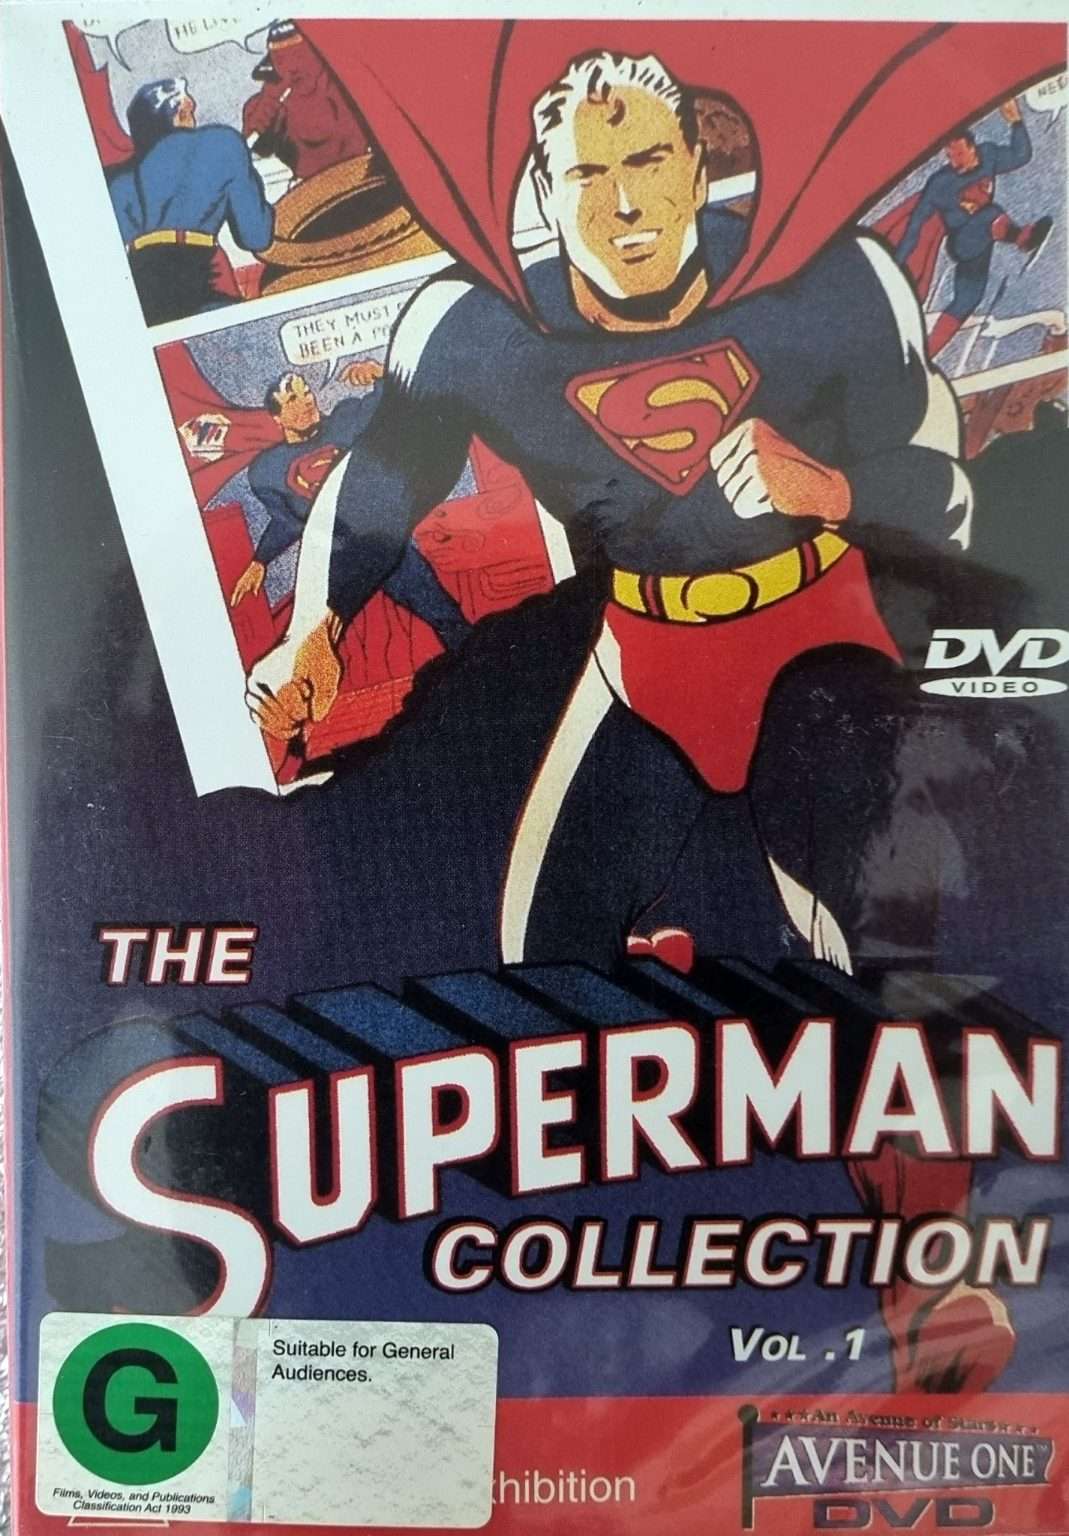 The Superman Collection Vol. 1